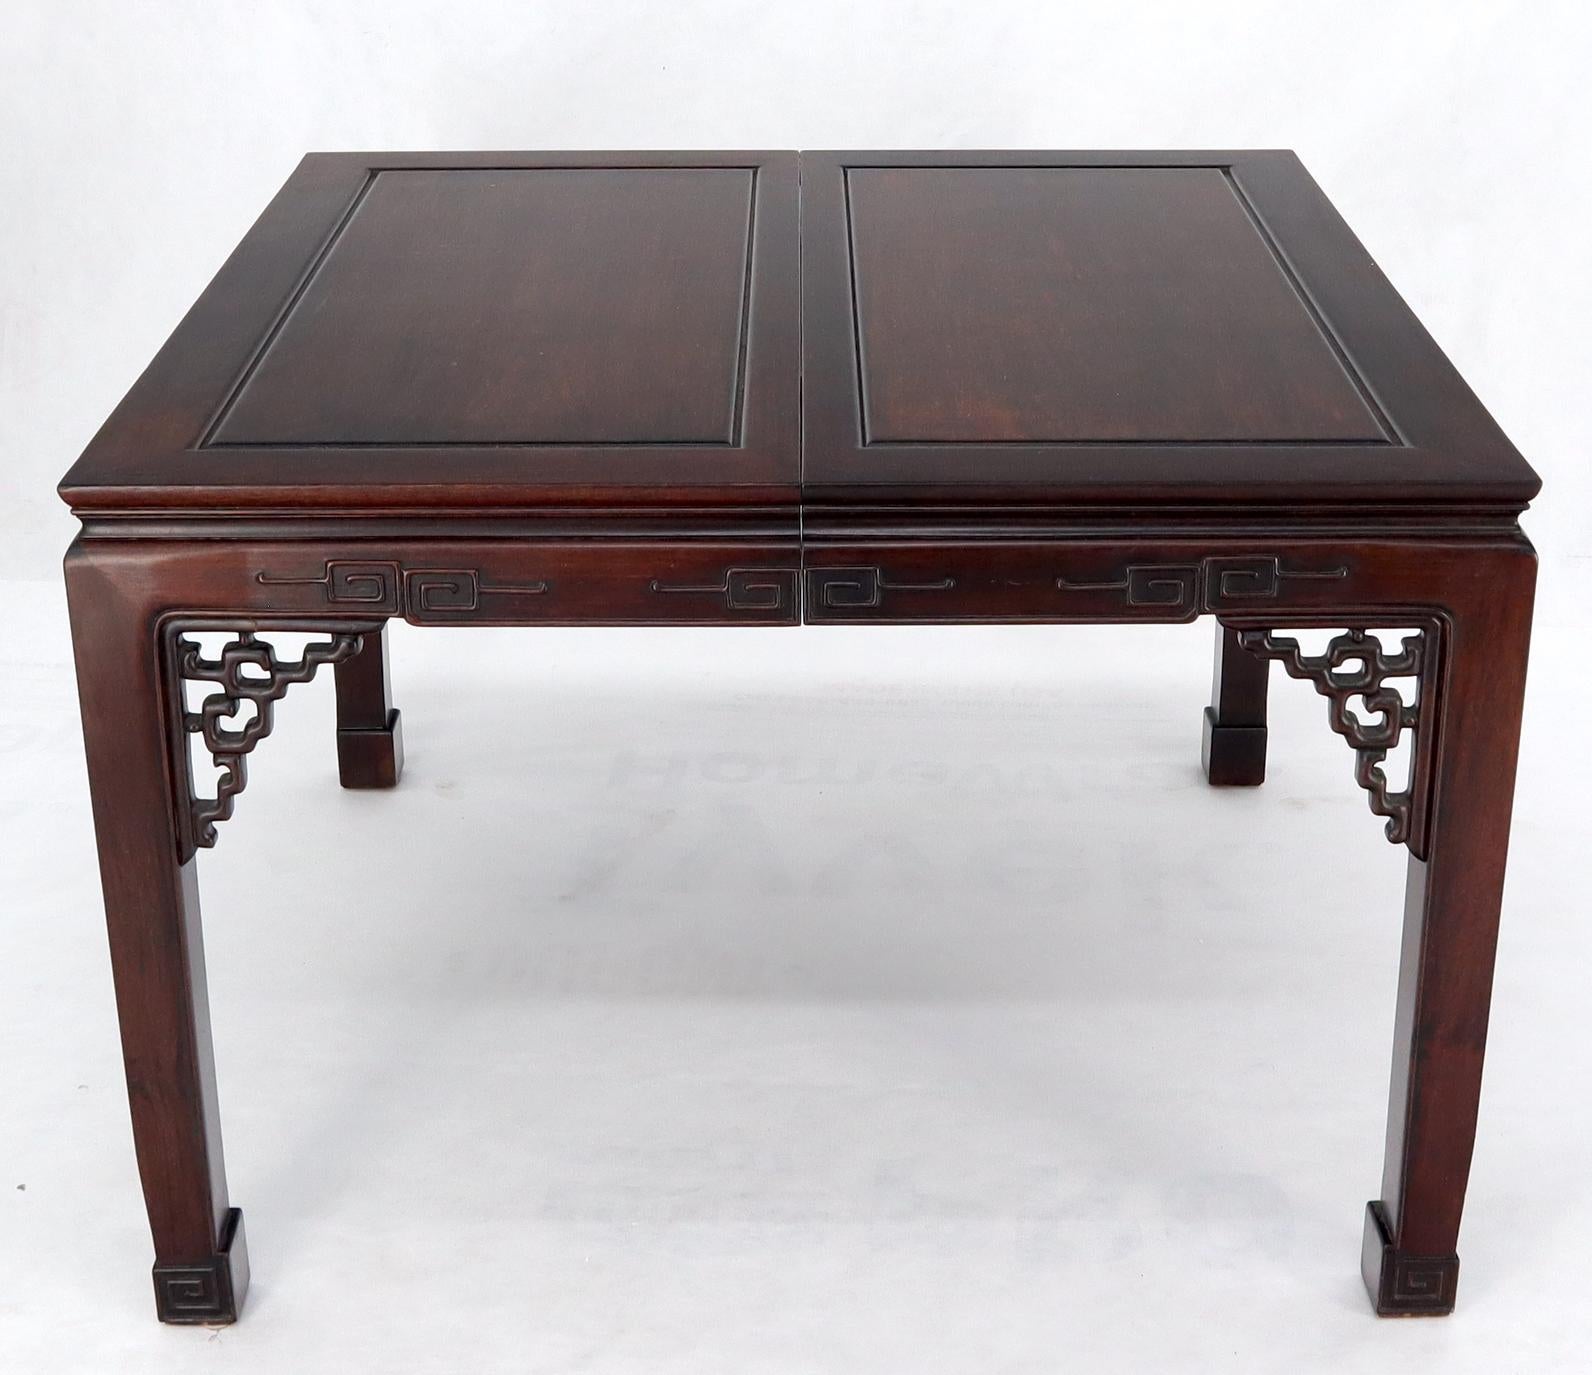 Solid rosewood Chinese Chippendale style square dining table with 2x22 leaves extension boards. Mid-Century Modern decor match.